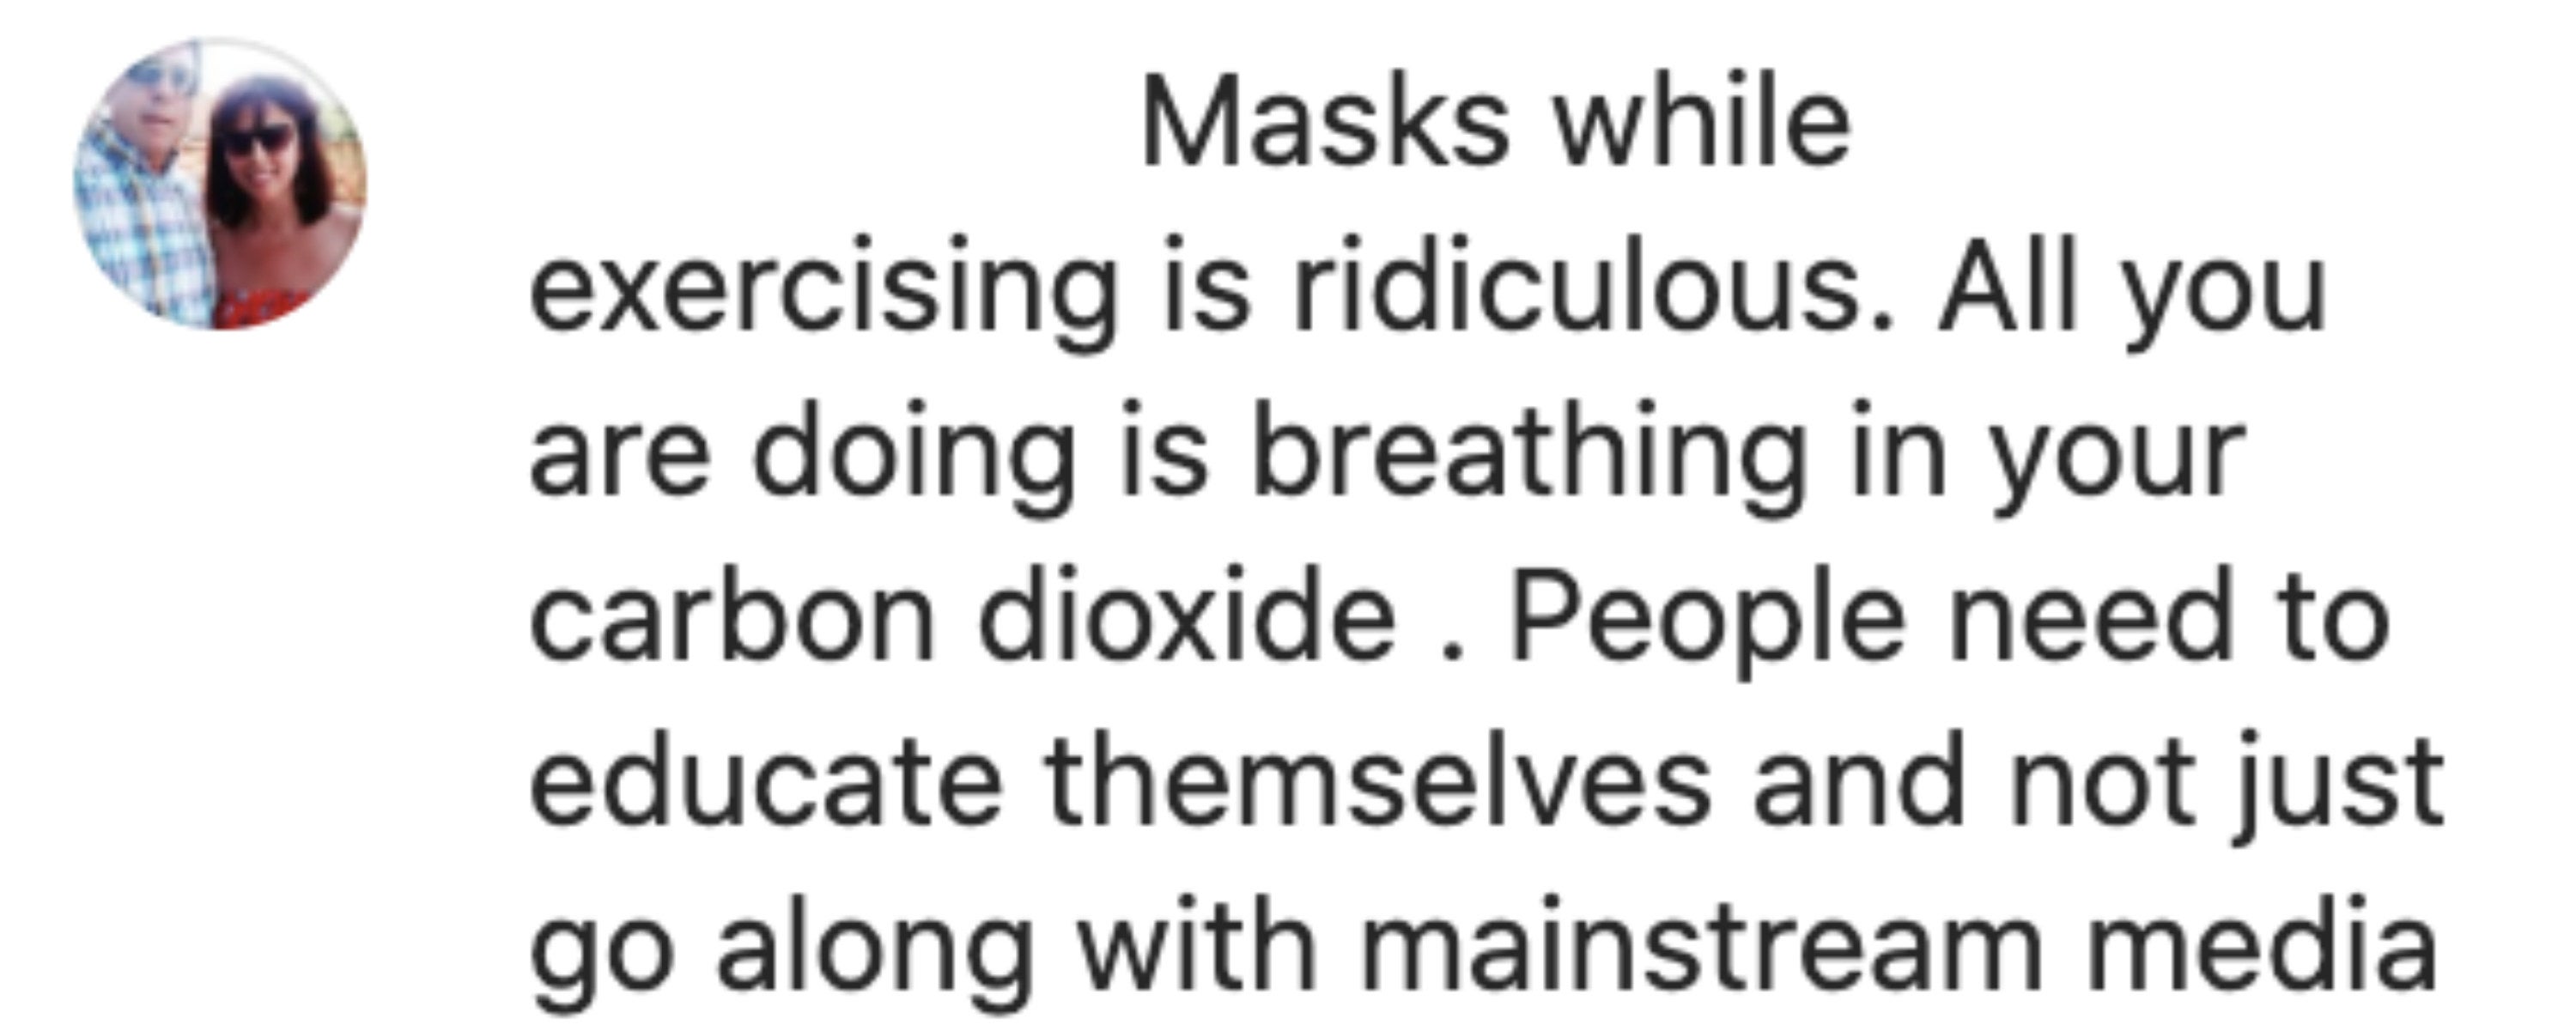 Comment reading, &quot;Masks while exercising is ridiculous. All you are doing is breathing in your carbon dioxide. People need to educate themselves and not just go along with mainstream media.&quot;